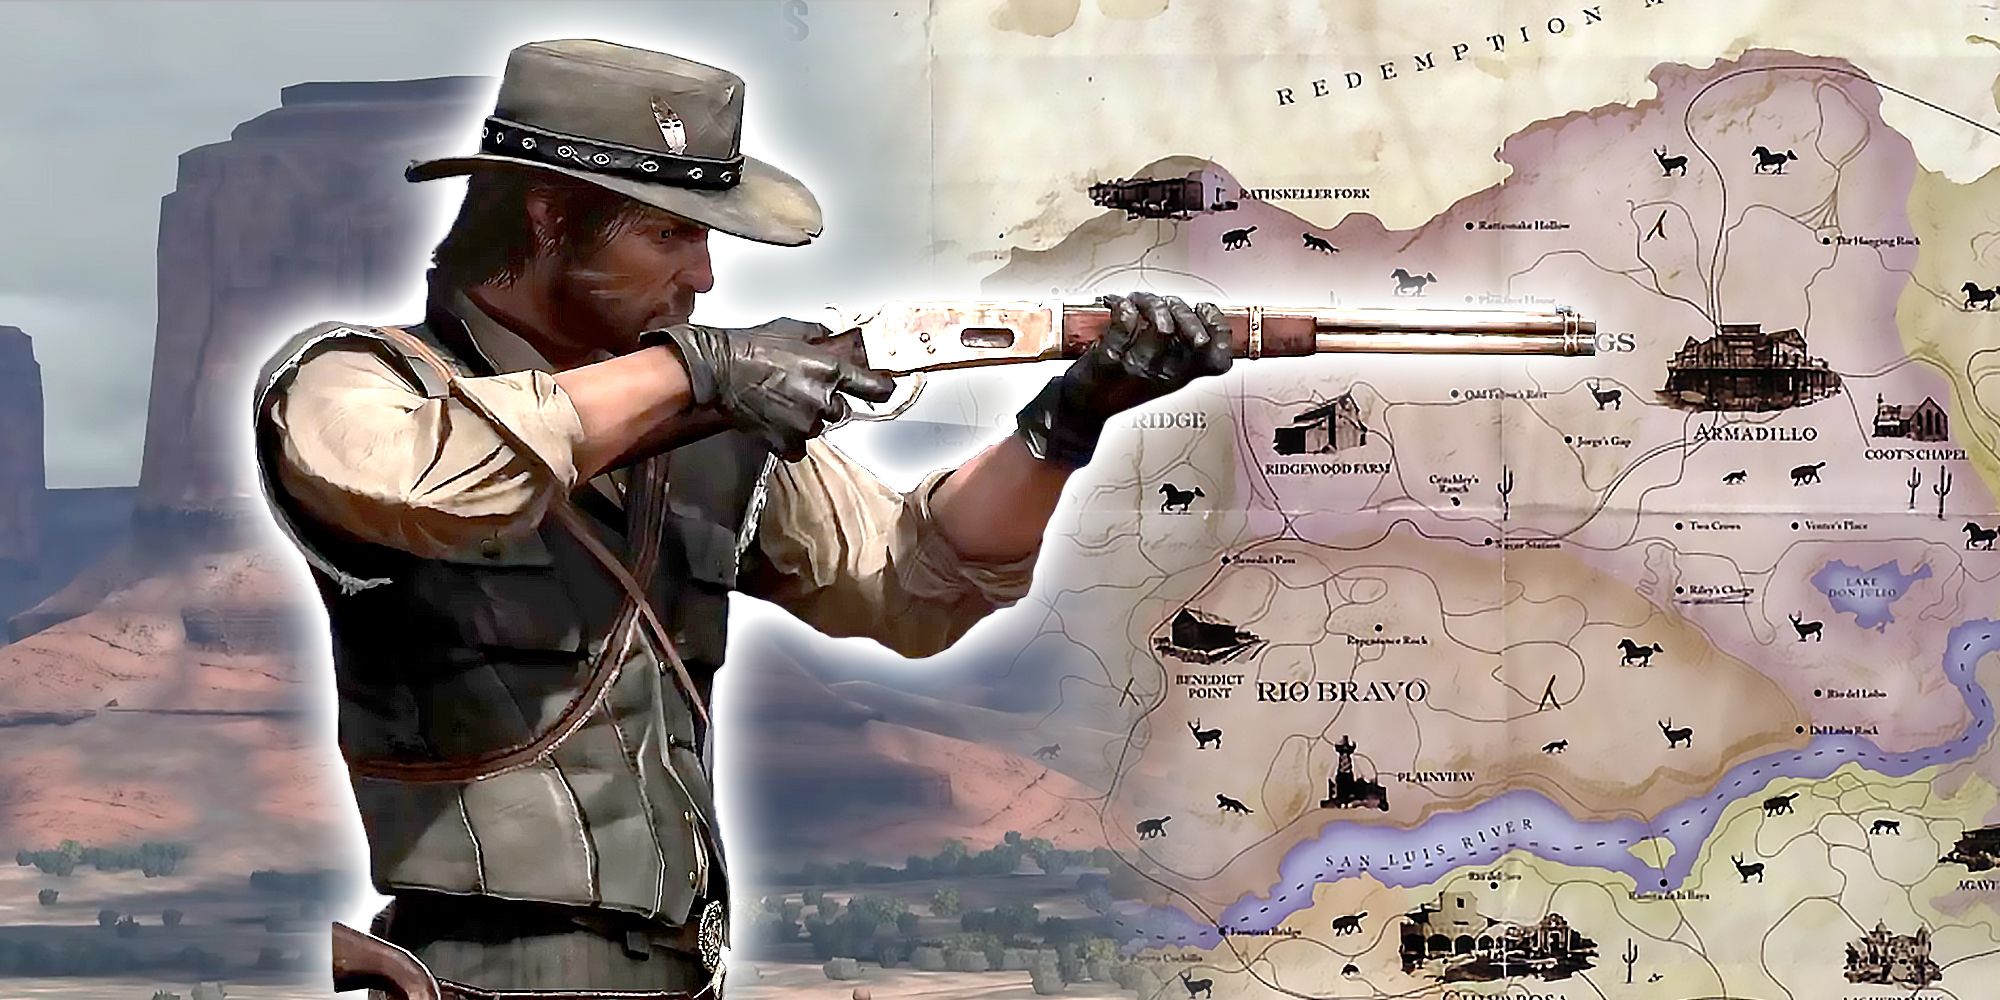 https://static1.cbrimages.com/wordpress/wp-content/uploads/2023/08/red-dead-redemption-john-marston-firing-rifle-with-map-in-background.jpg